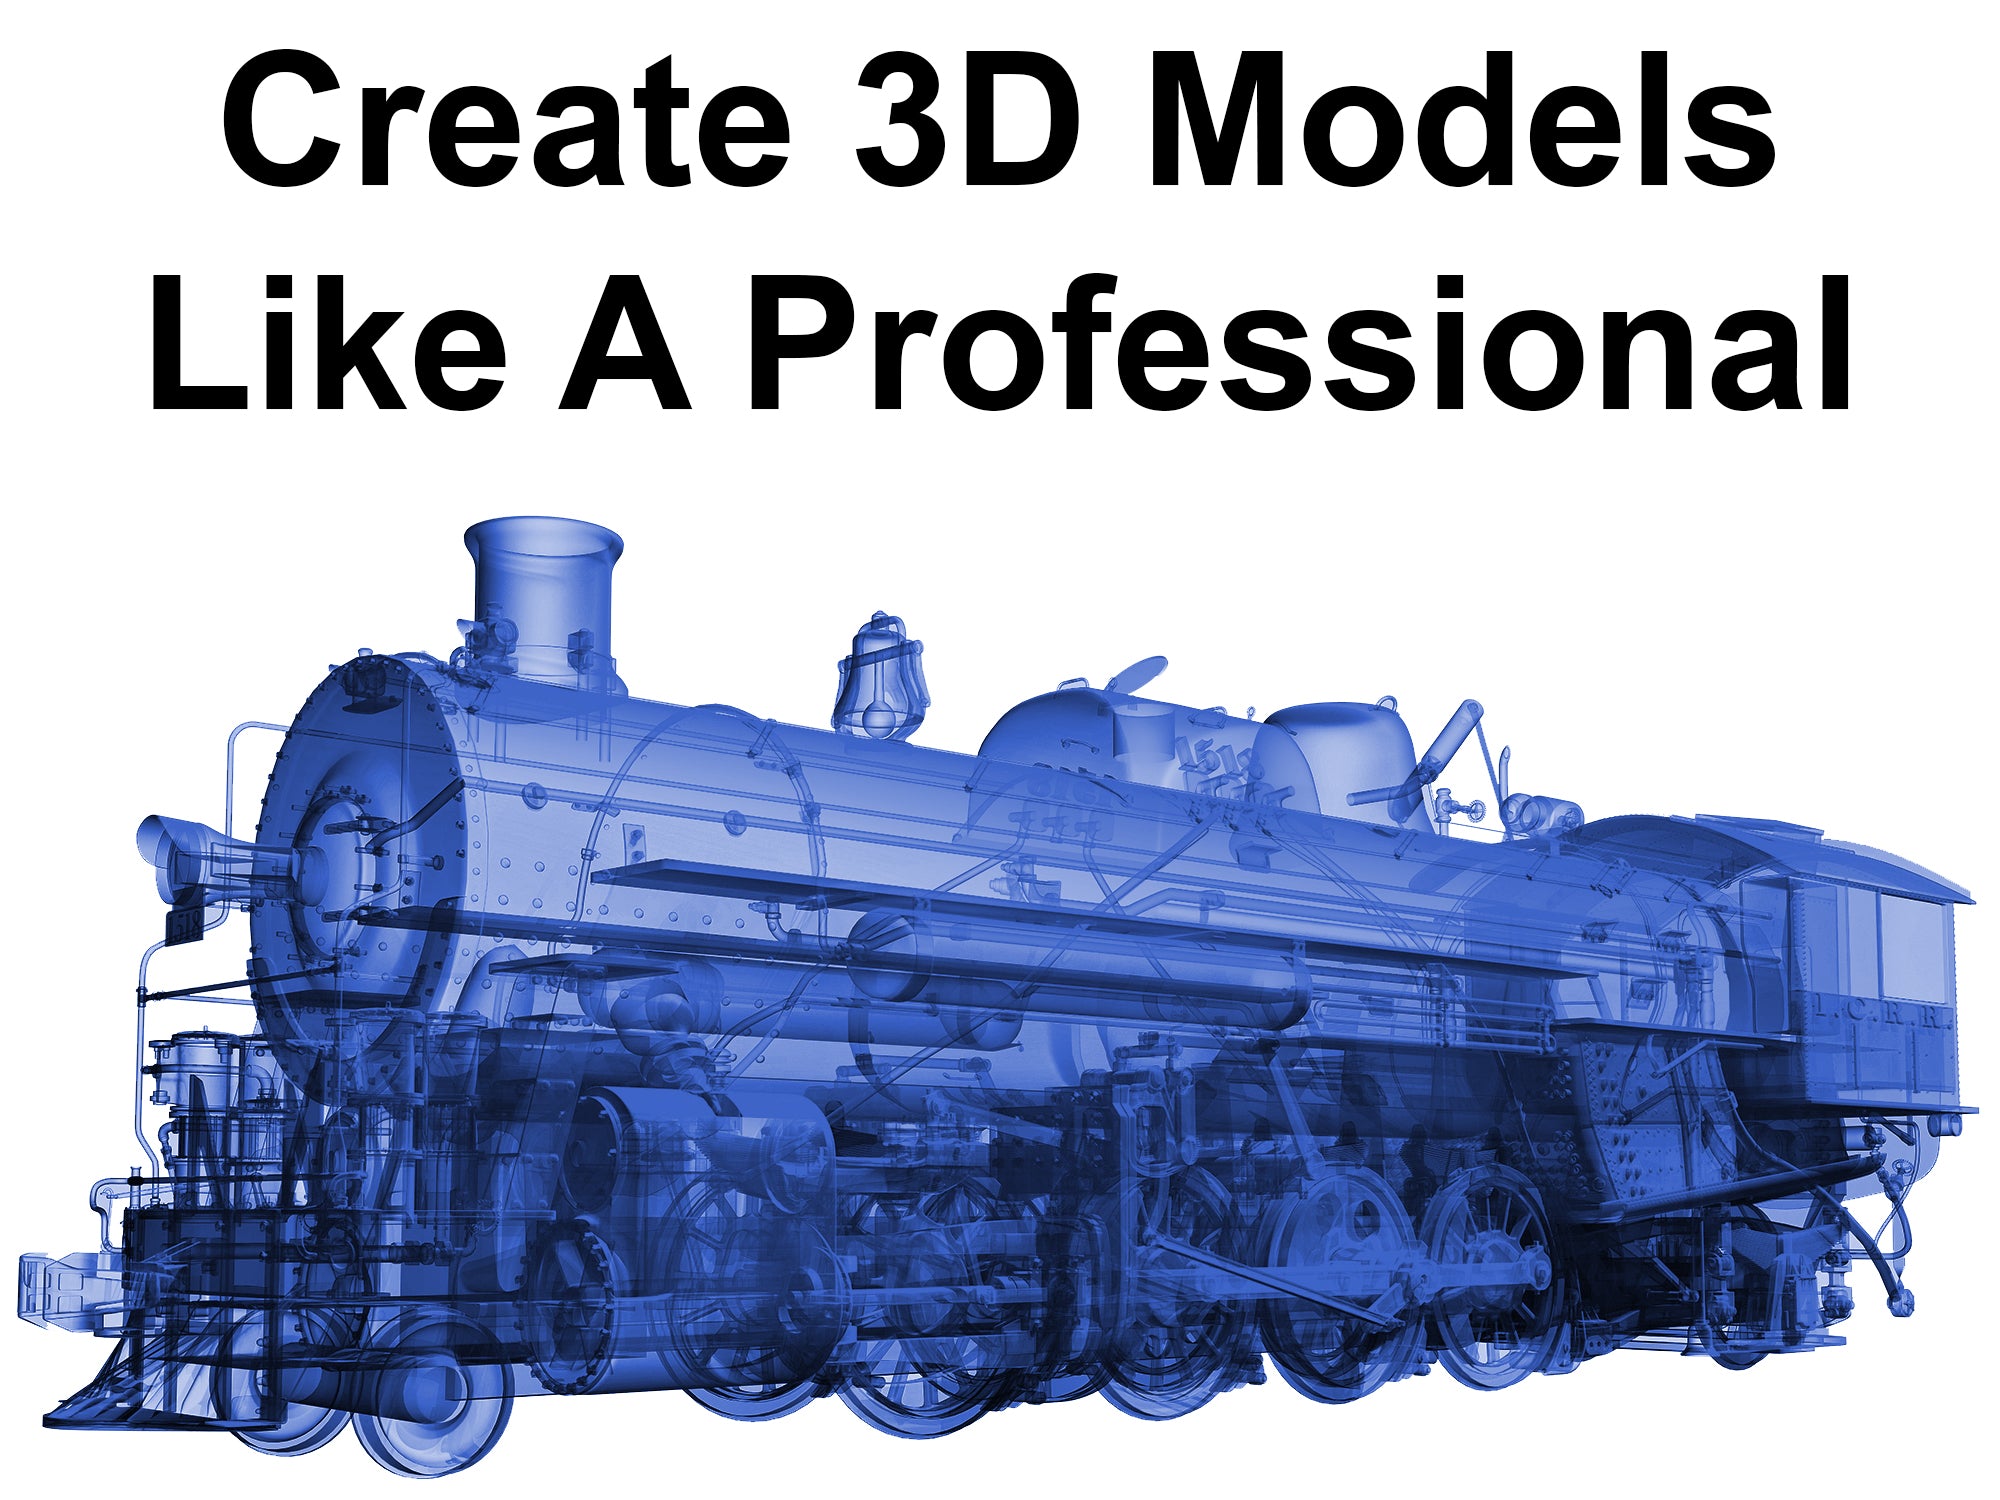 How to Create 3D Models like A Professional